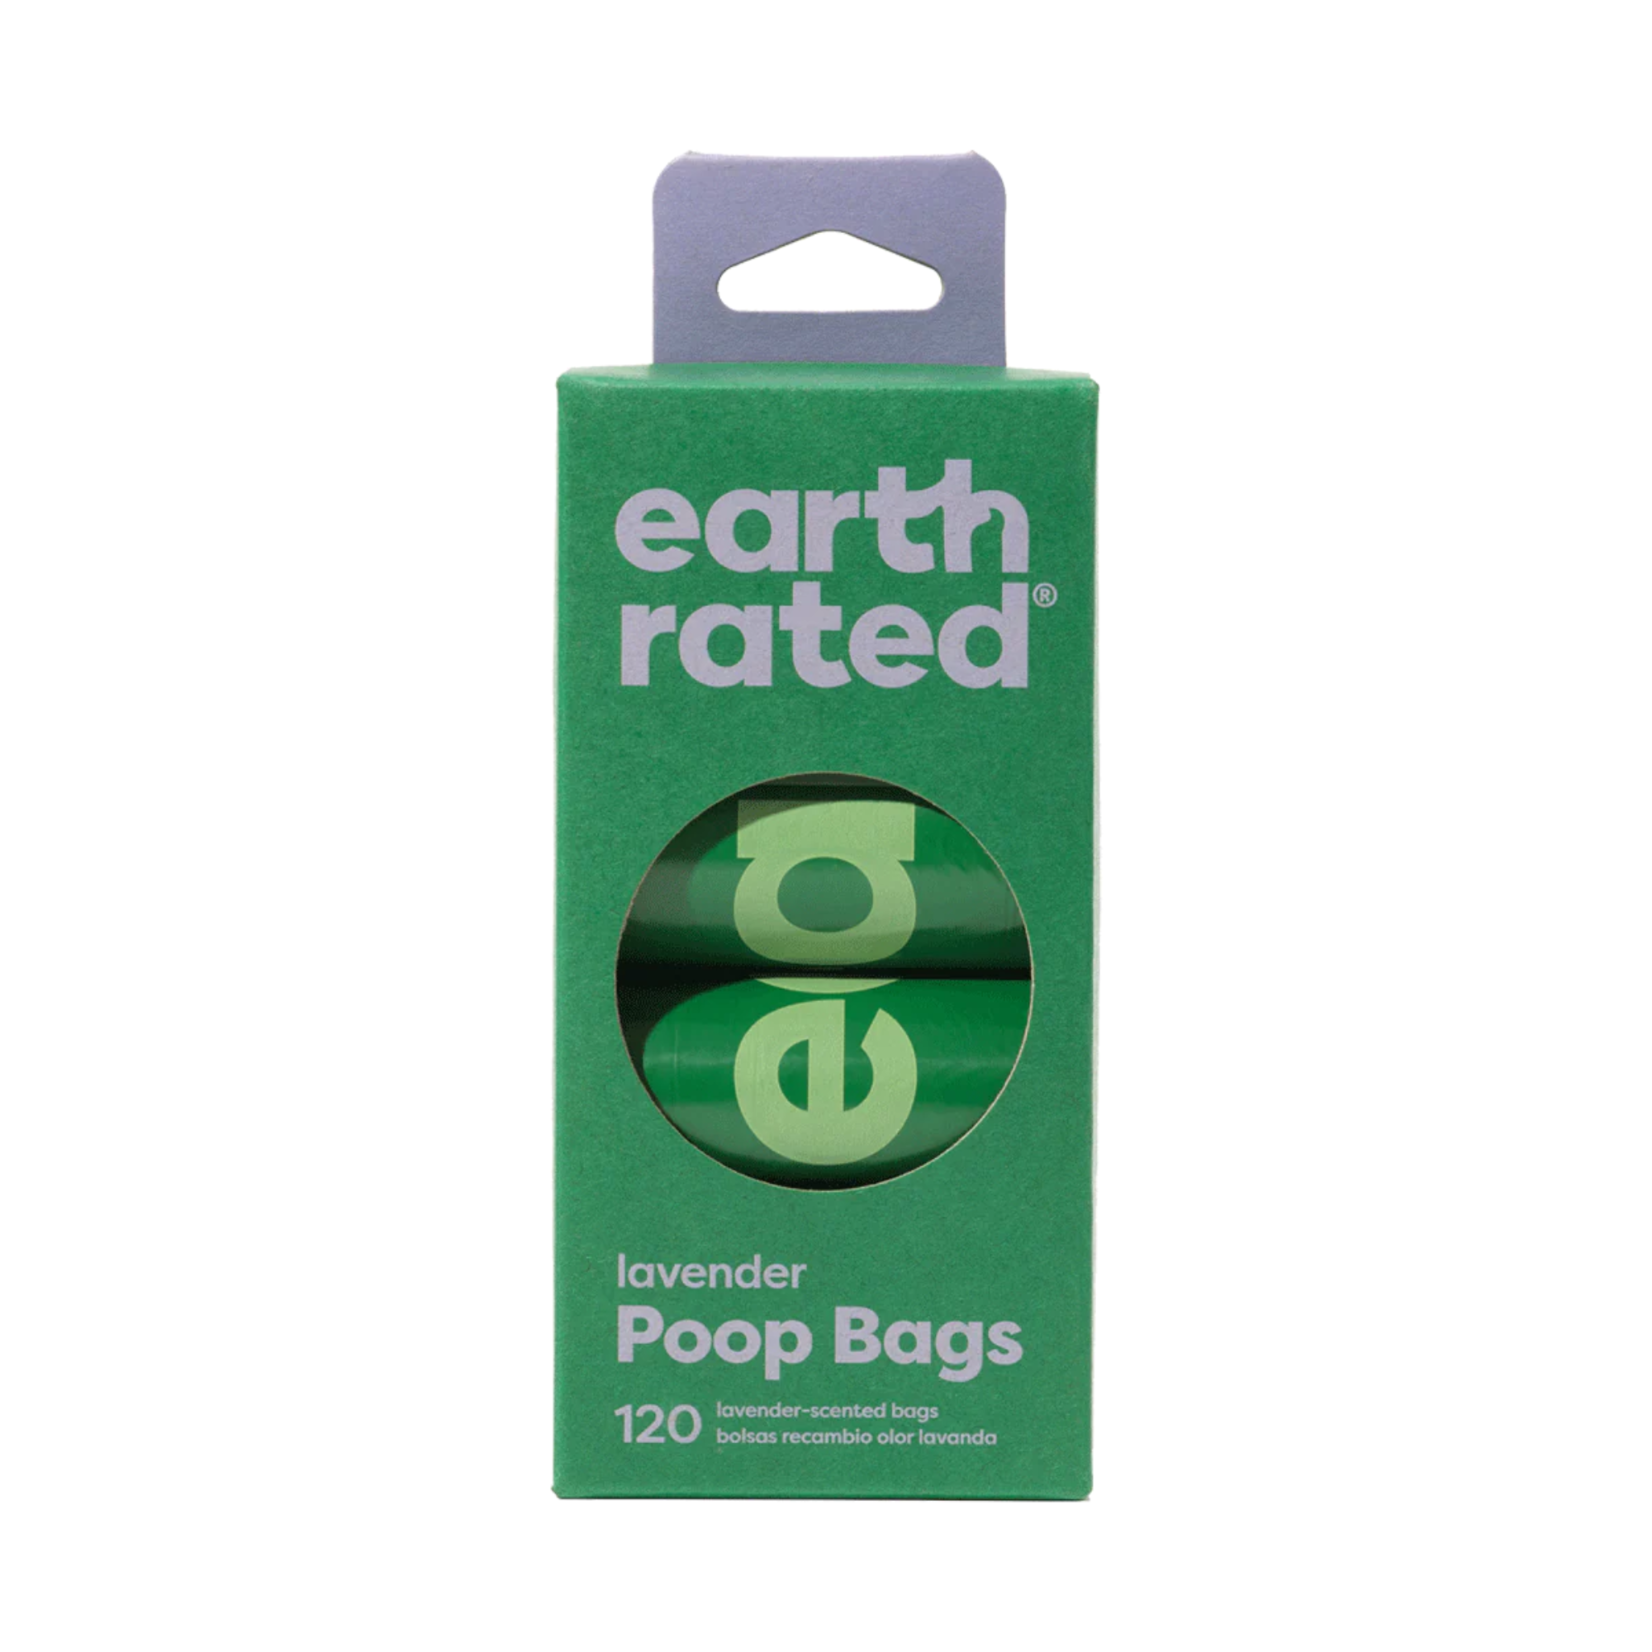 Earth Rated Earth Rated: Poop Dispenser Refill Rolls 120pk